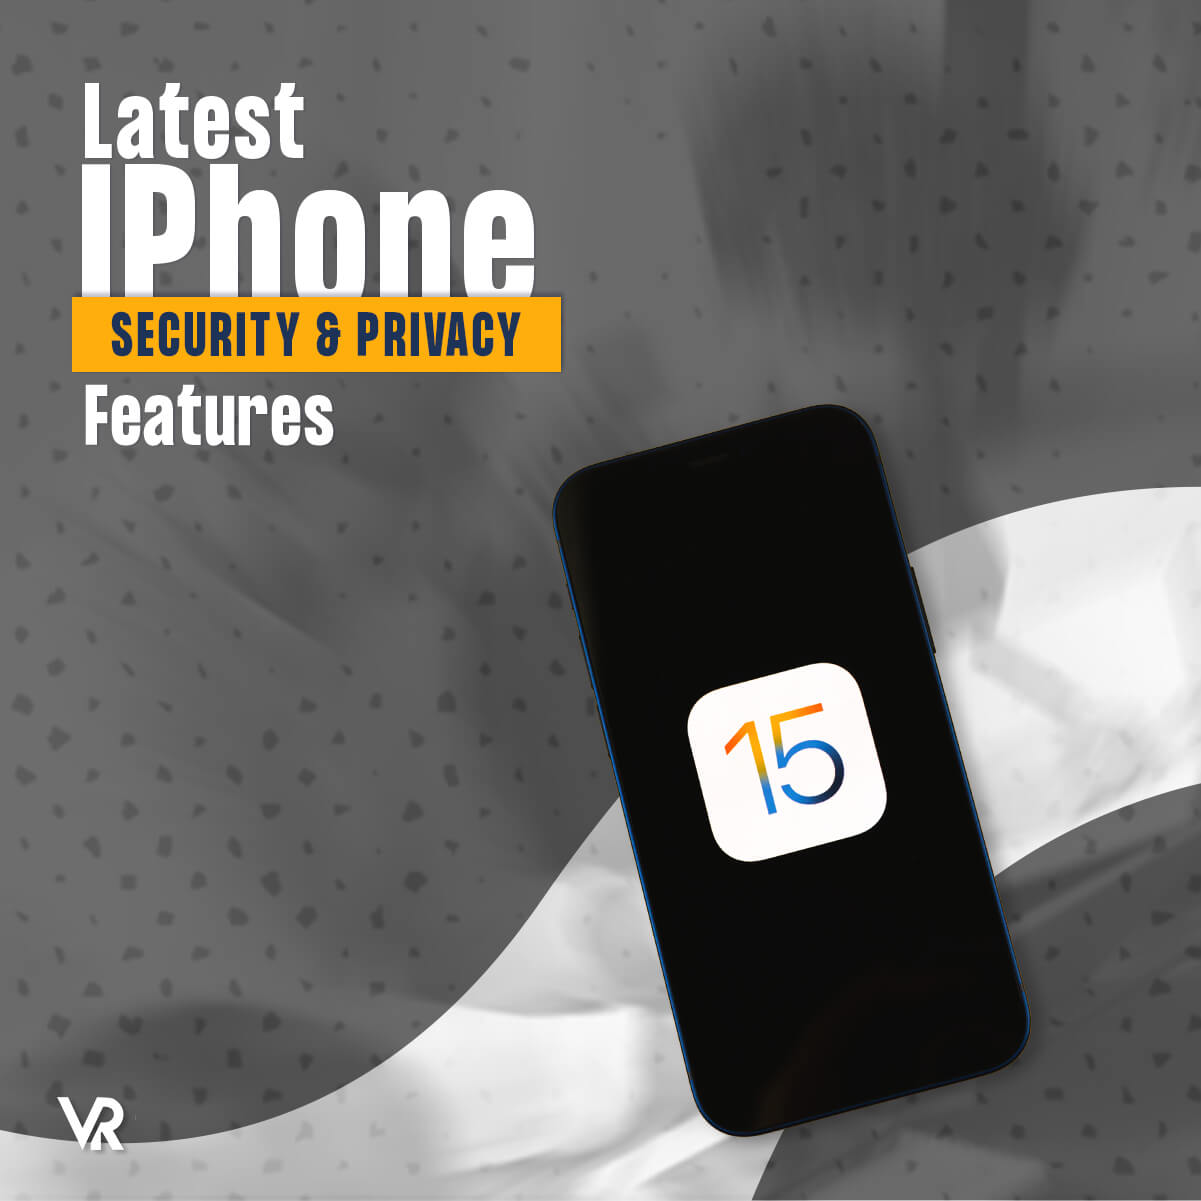 iOS-15-Top-5-Latest-iPhone-Security-&-Privacy-Features-Featured-Image